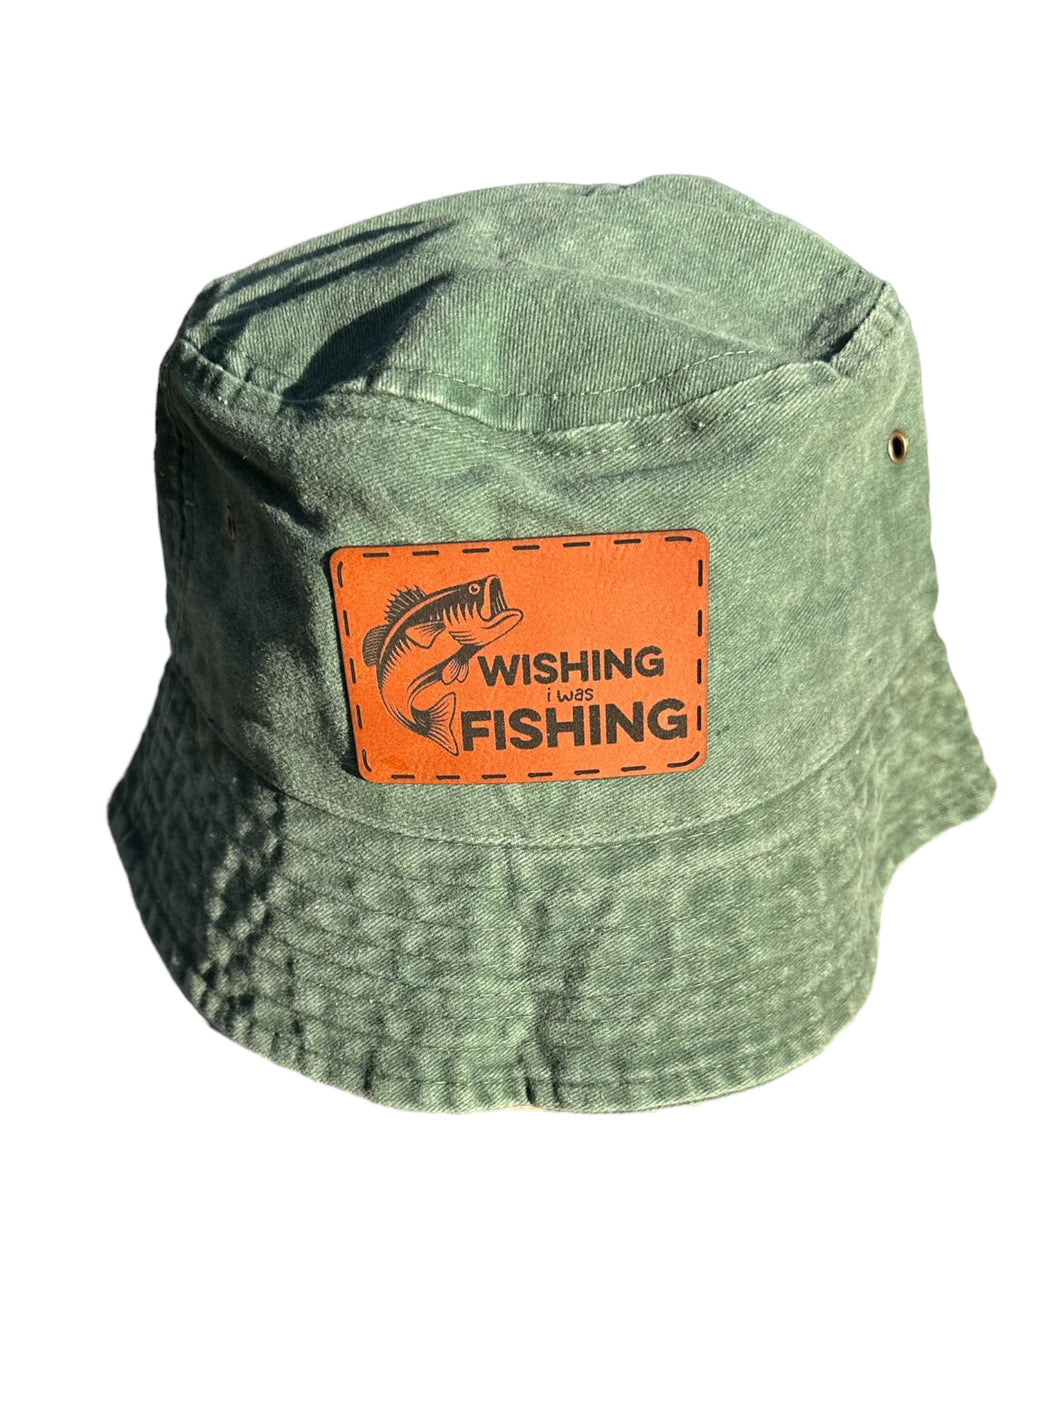 100% Cotton Green Fishing Bucket Hats W/ Leather Patches